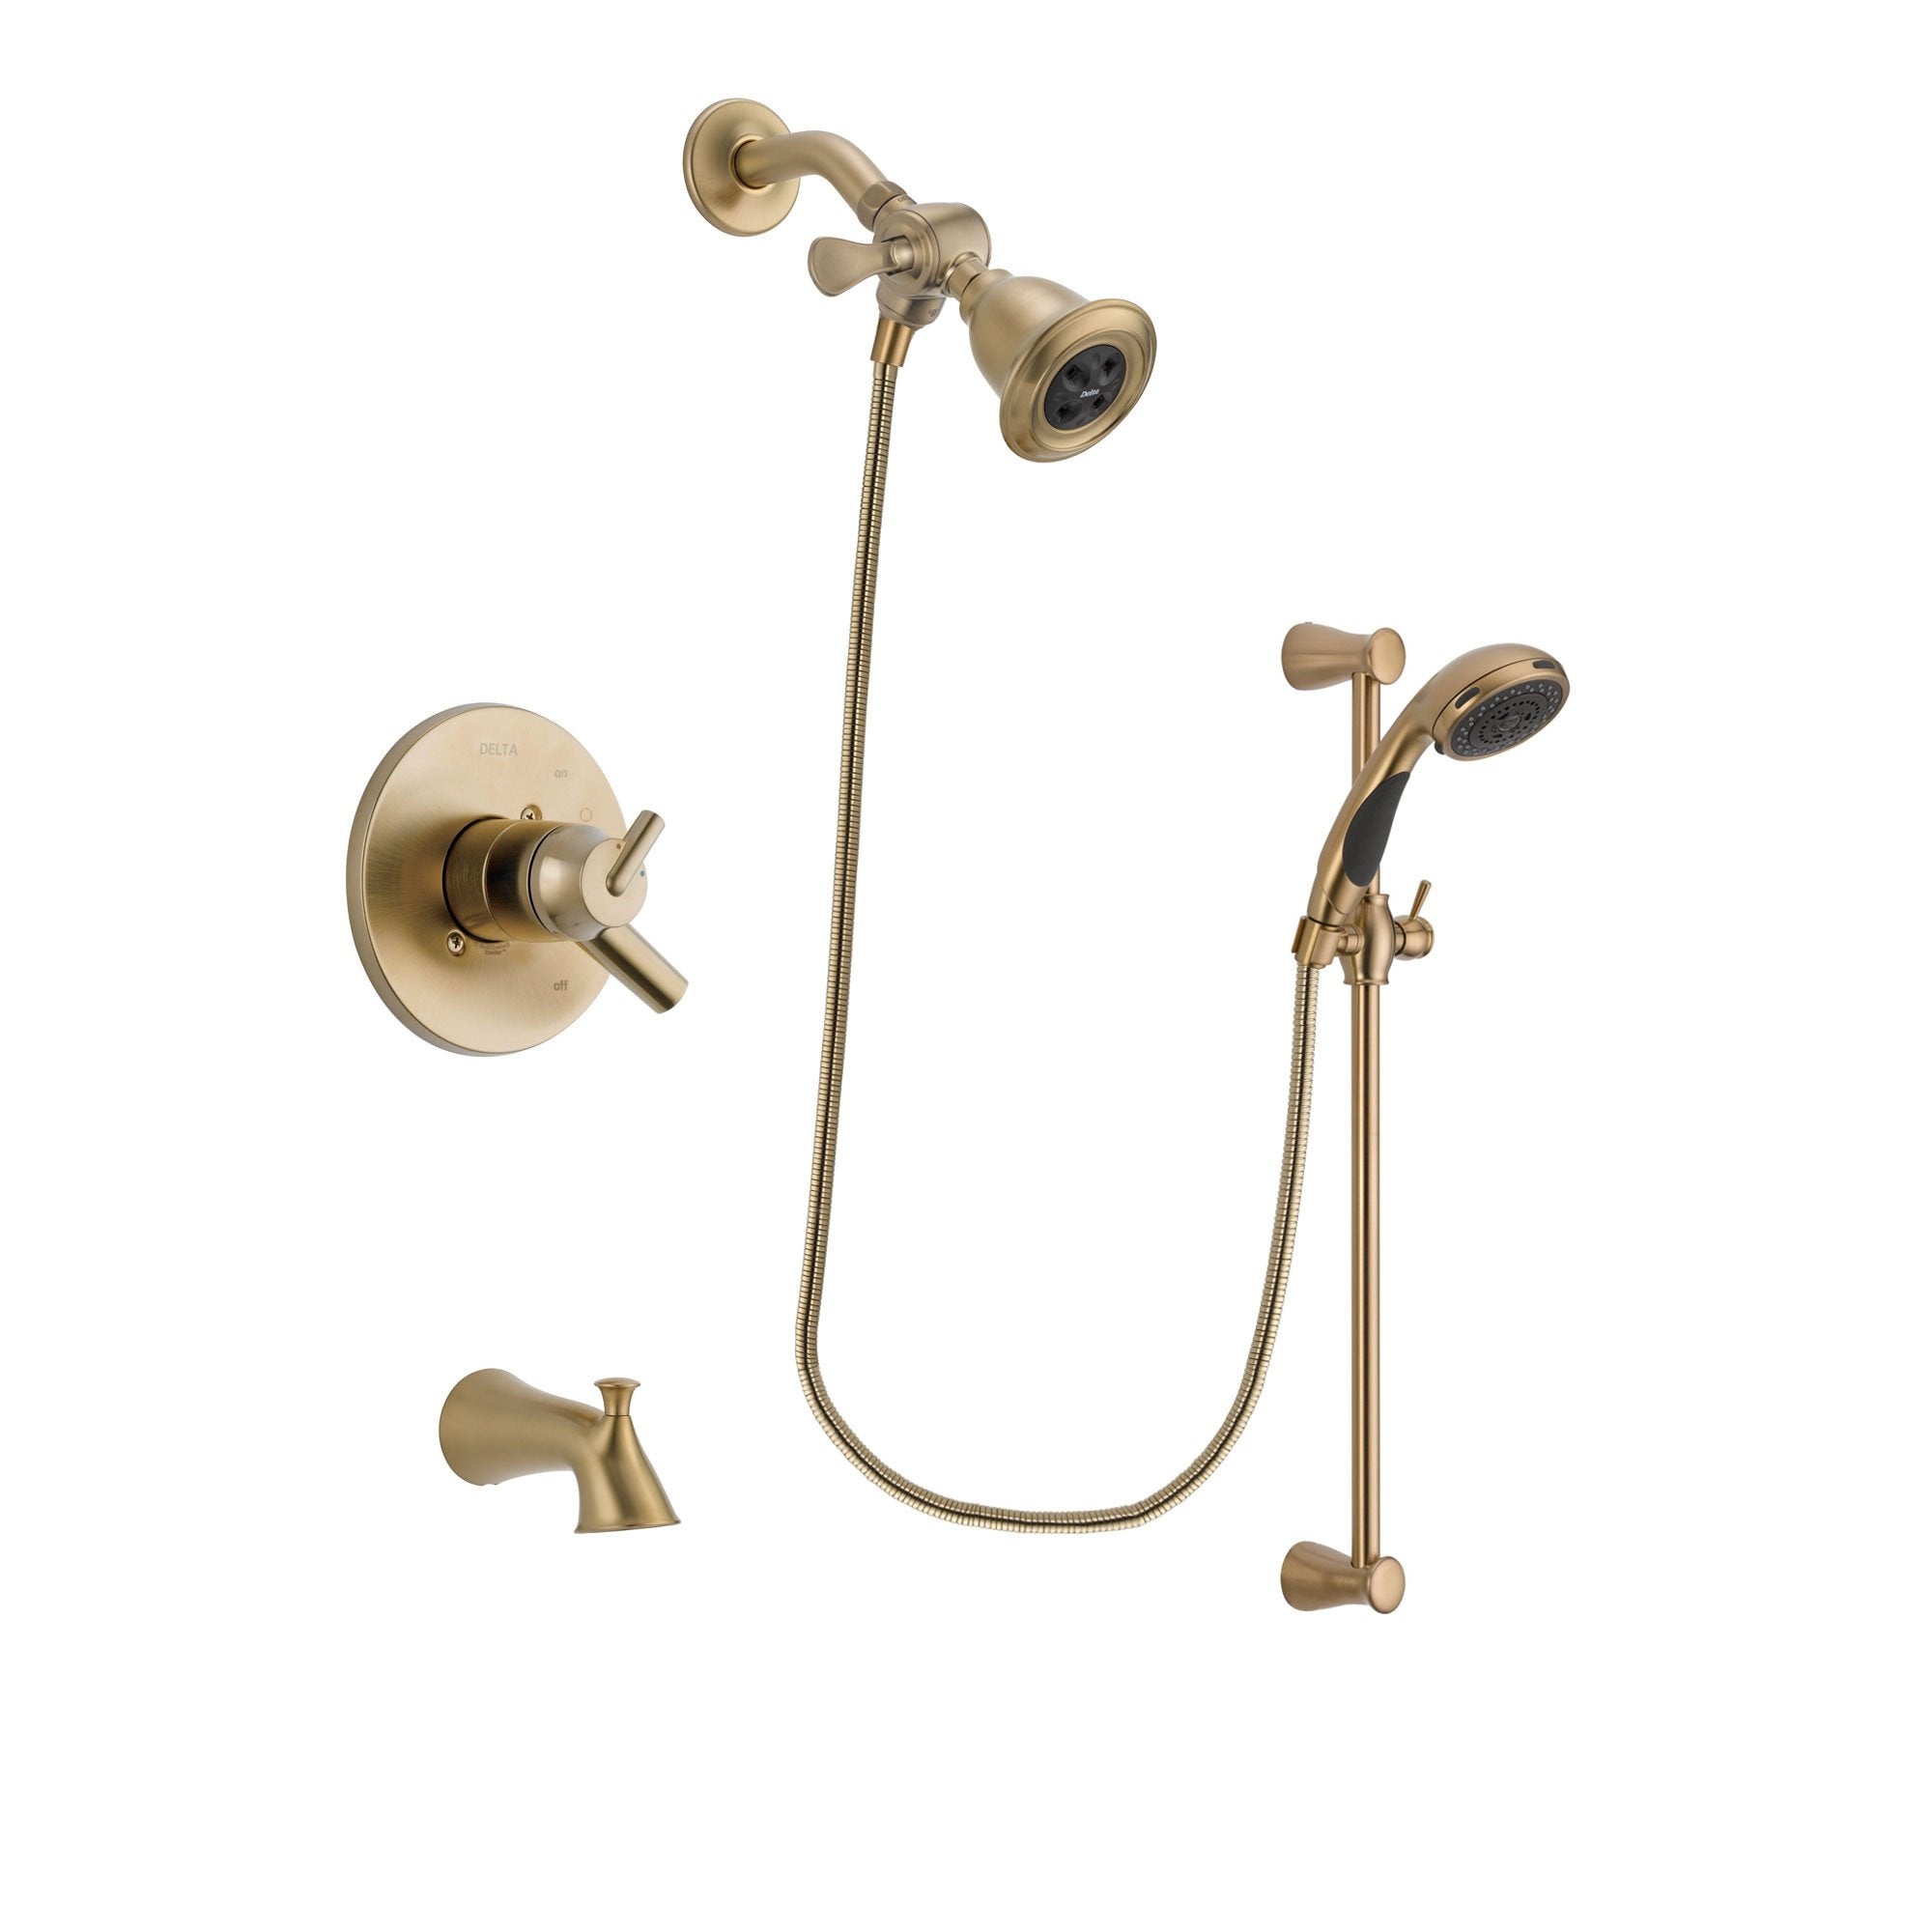 Delta Trinsic Champagne Bronze Finish Dual Control Tub and Shower Faucet System Package with Water Efficient Showerhead and Personal Handheld Shower Sprayer with Slide Bar Includes Rough-in Valve and Tub Spout DSP3465V